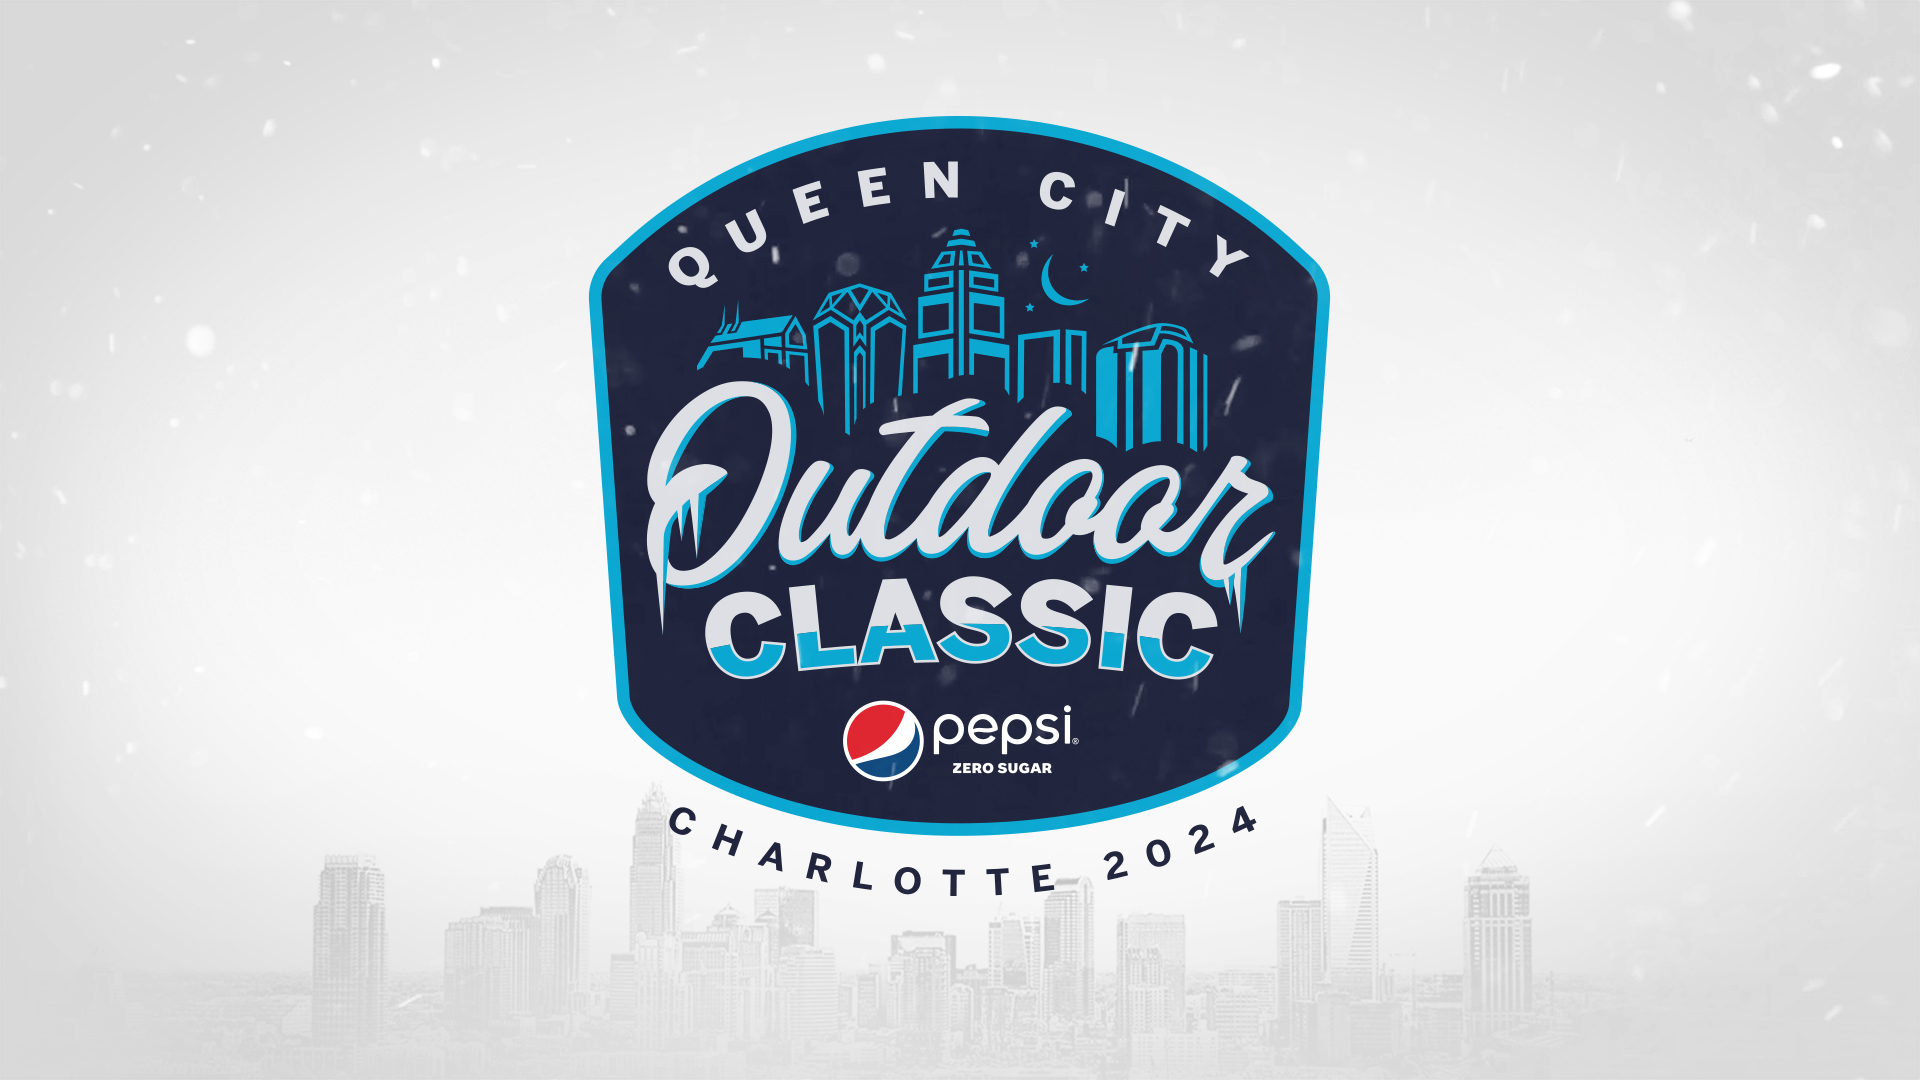 Queen City Outdoor Classic to Take Place at Truist Field in January 2024 - Charlotte Checkers